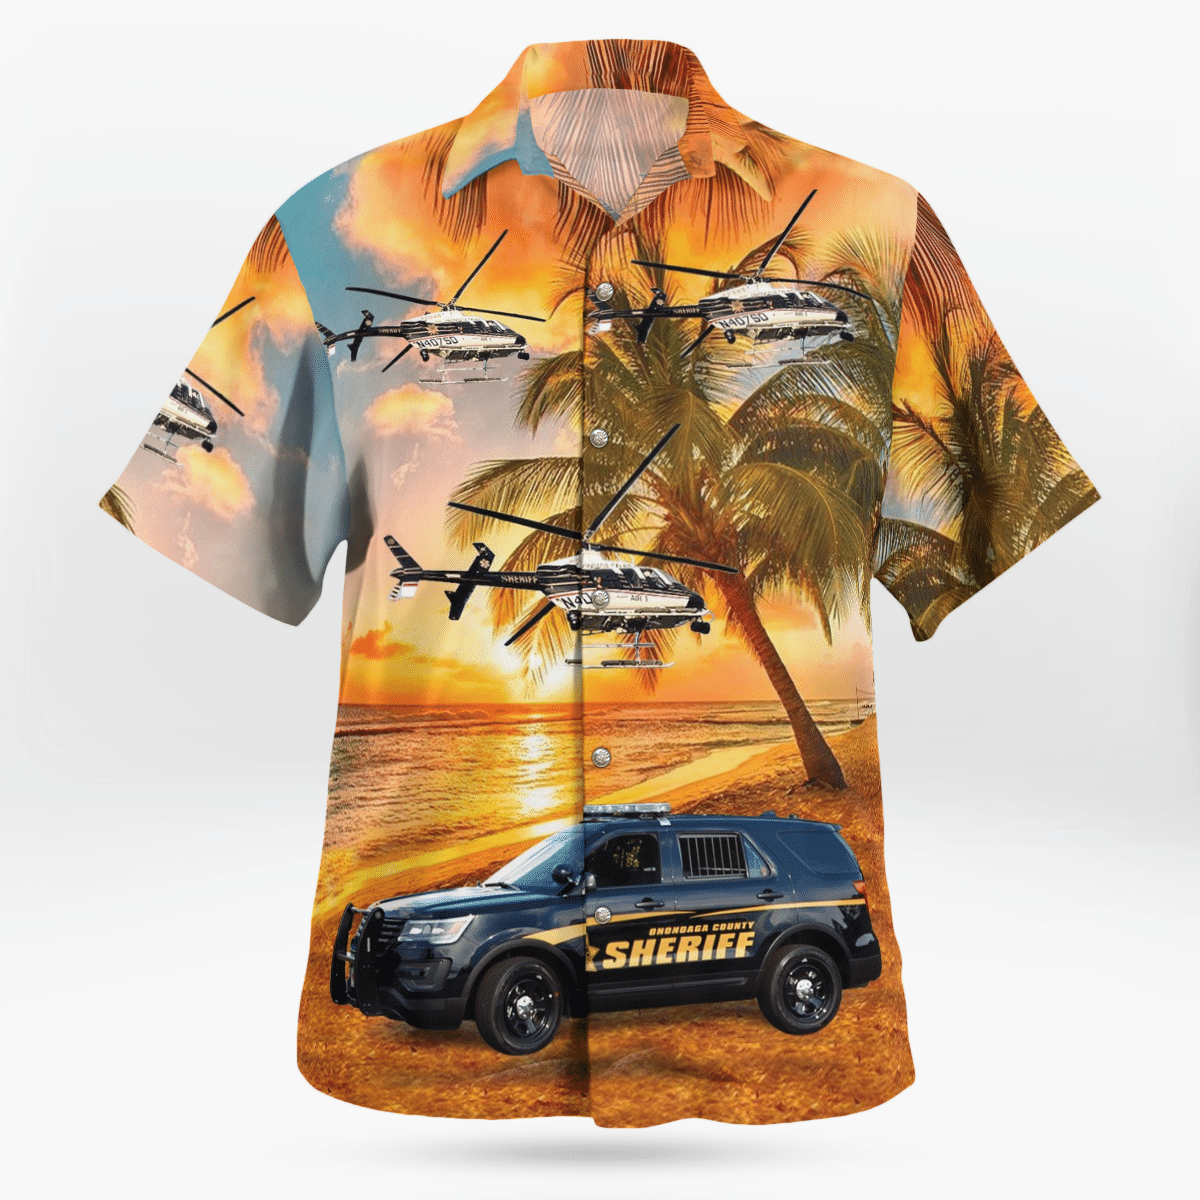 Hawaiian shirts never go out of style 77